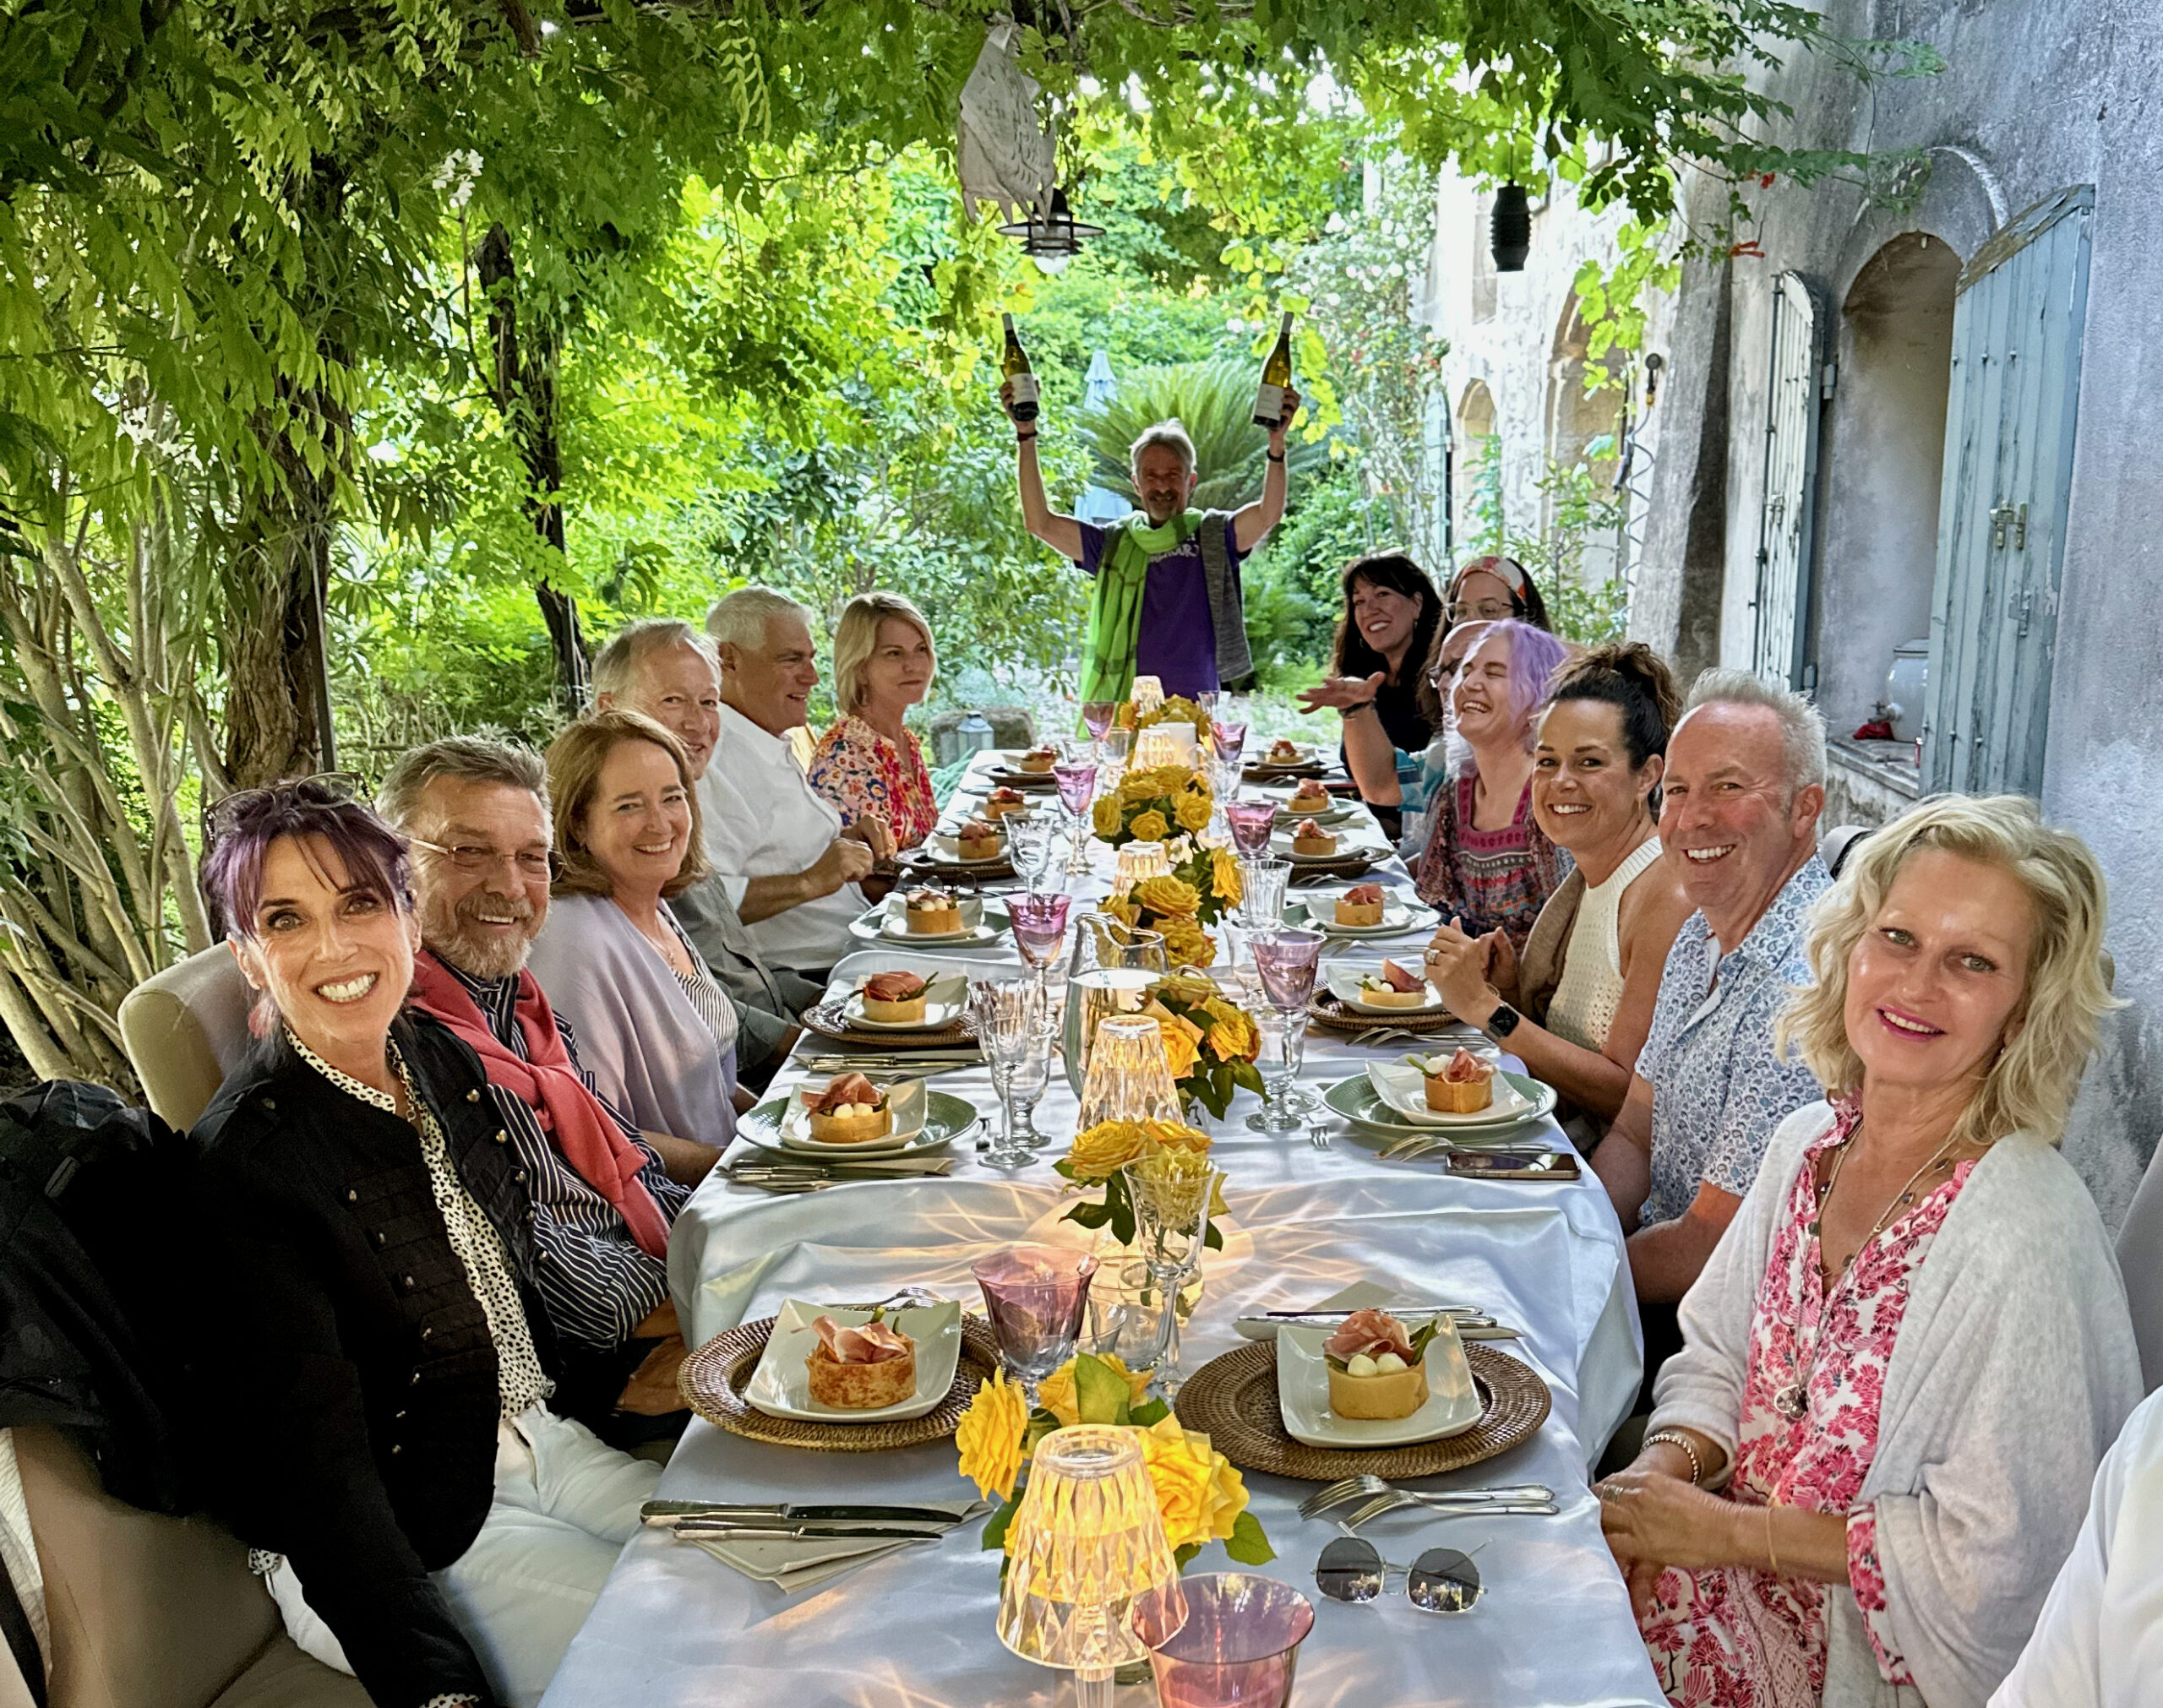 Tour guests with Christy and her guiding team in Provence, France.